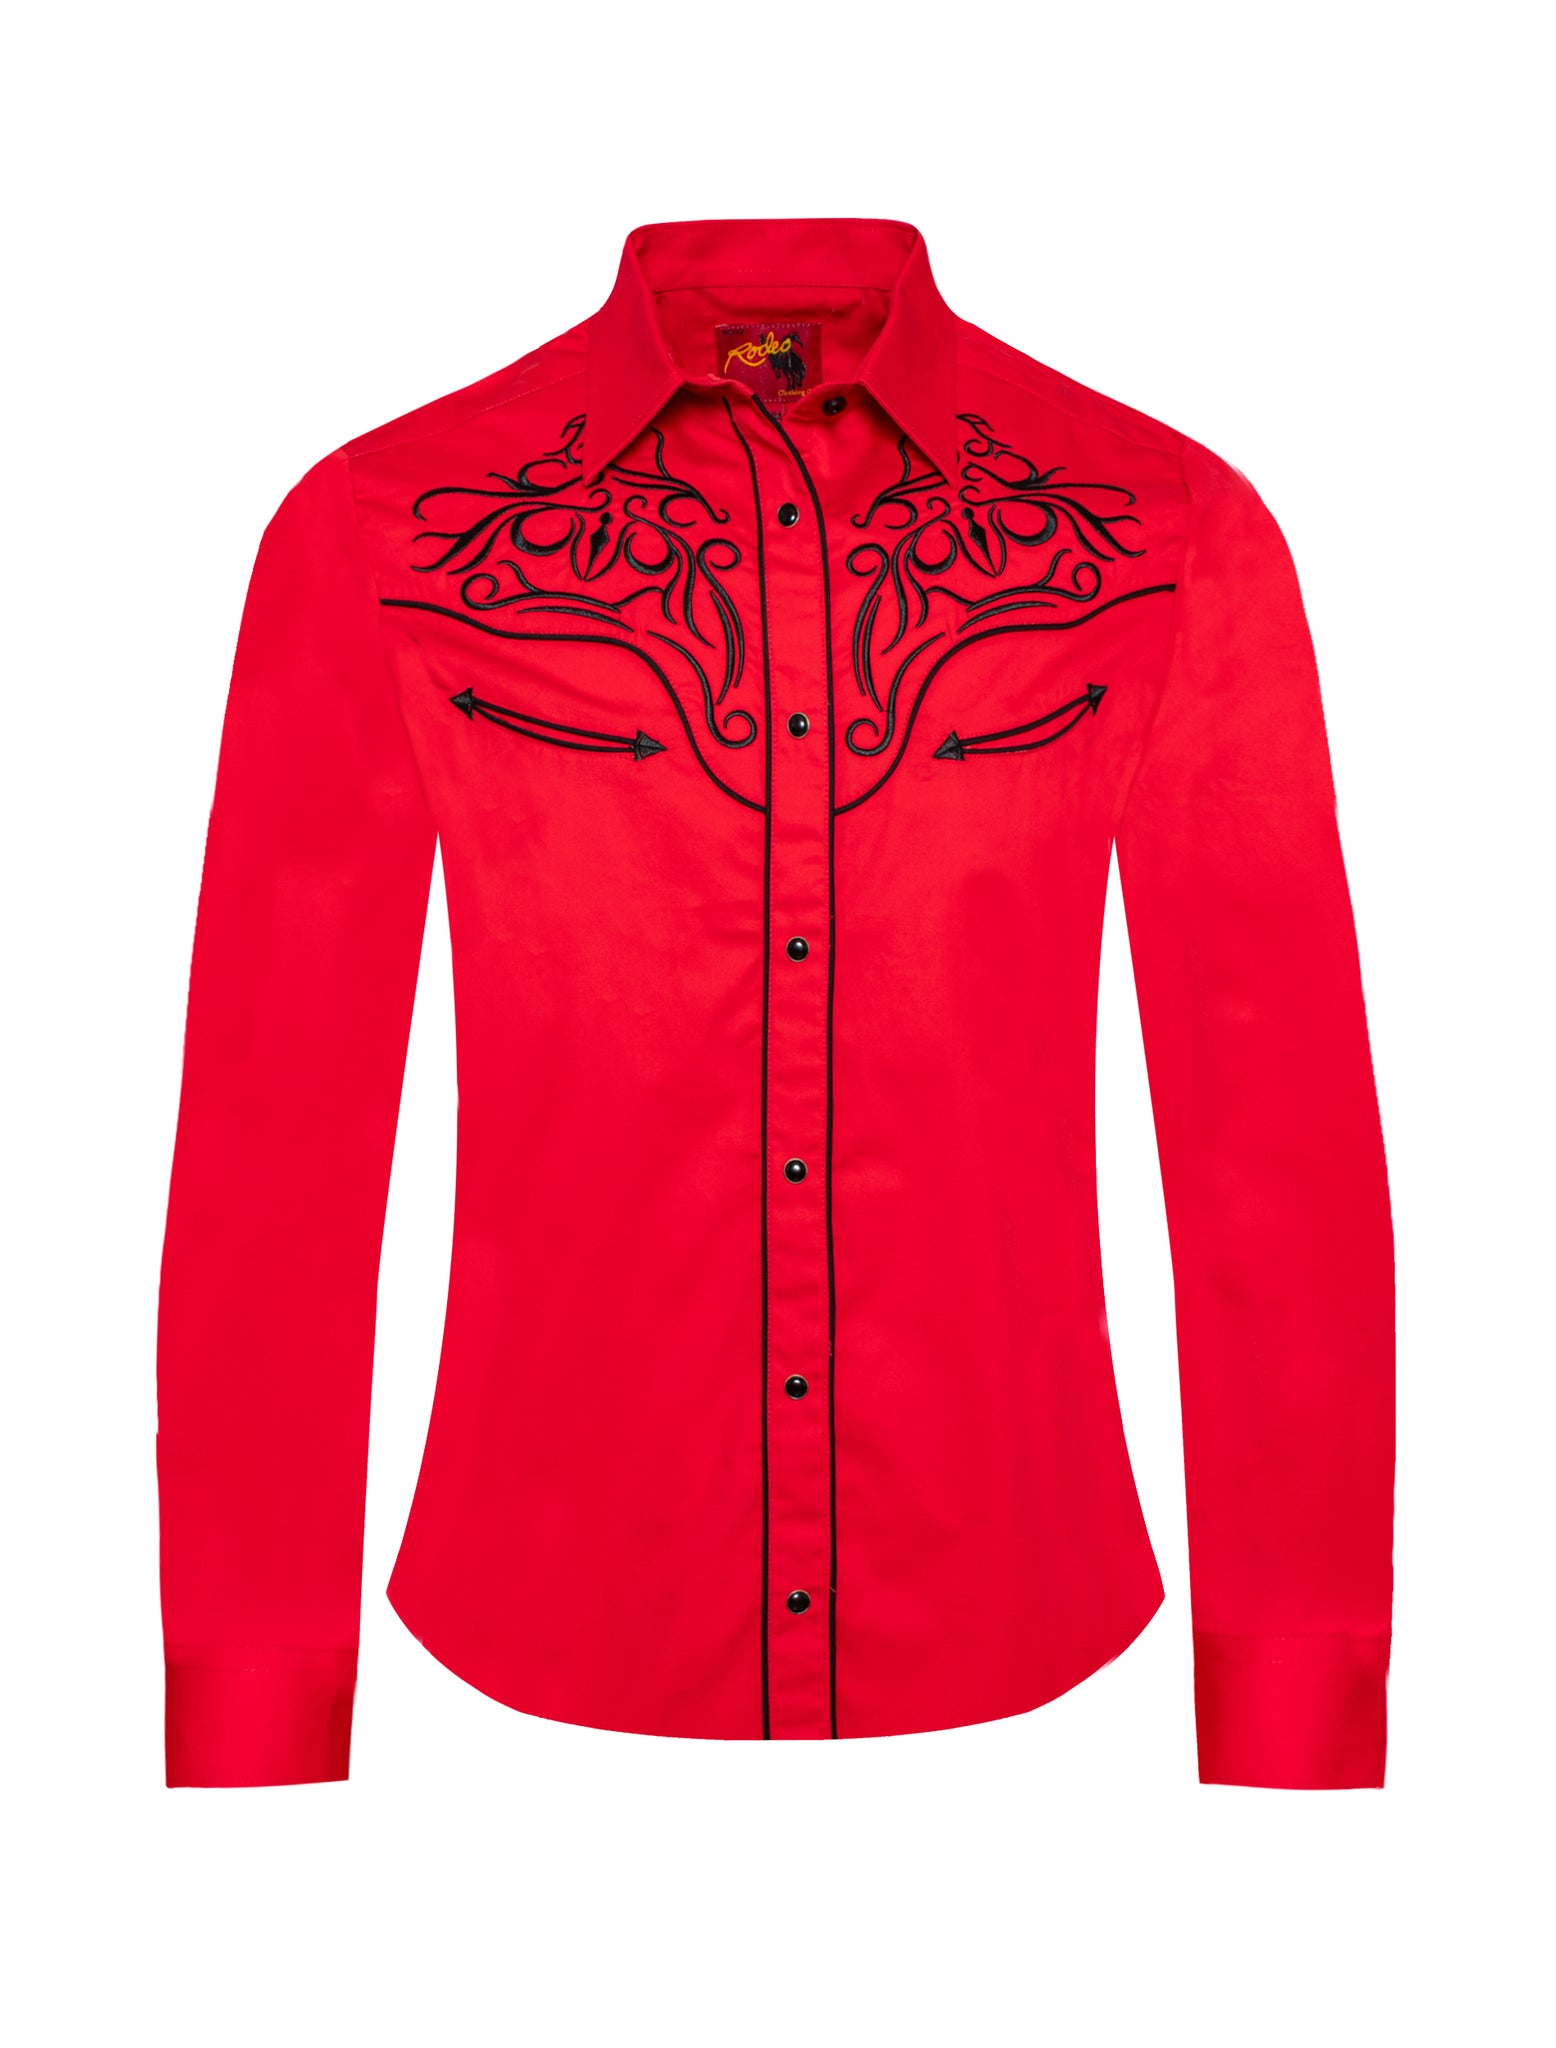 Women’s Western Embroidered Shirts-LS500-522